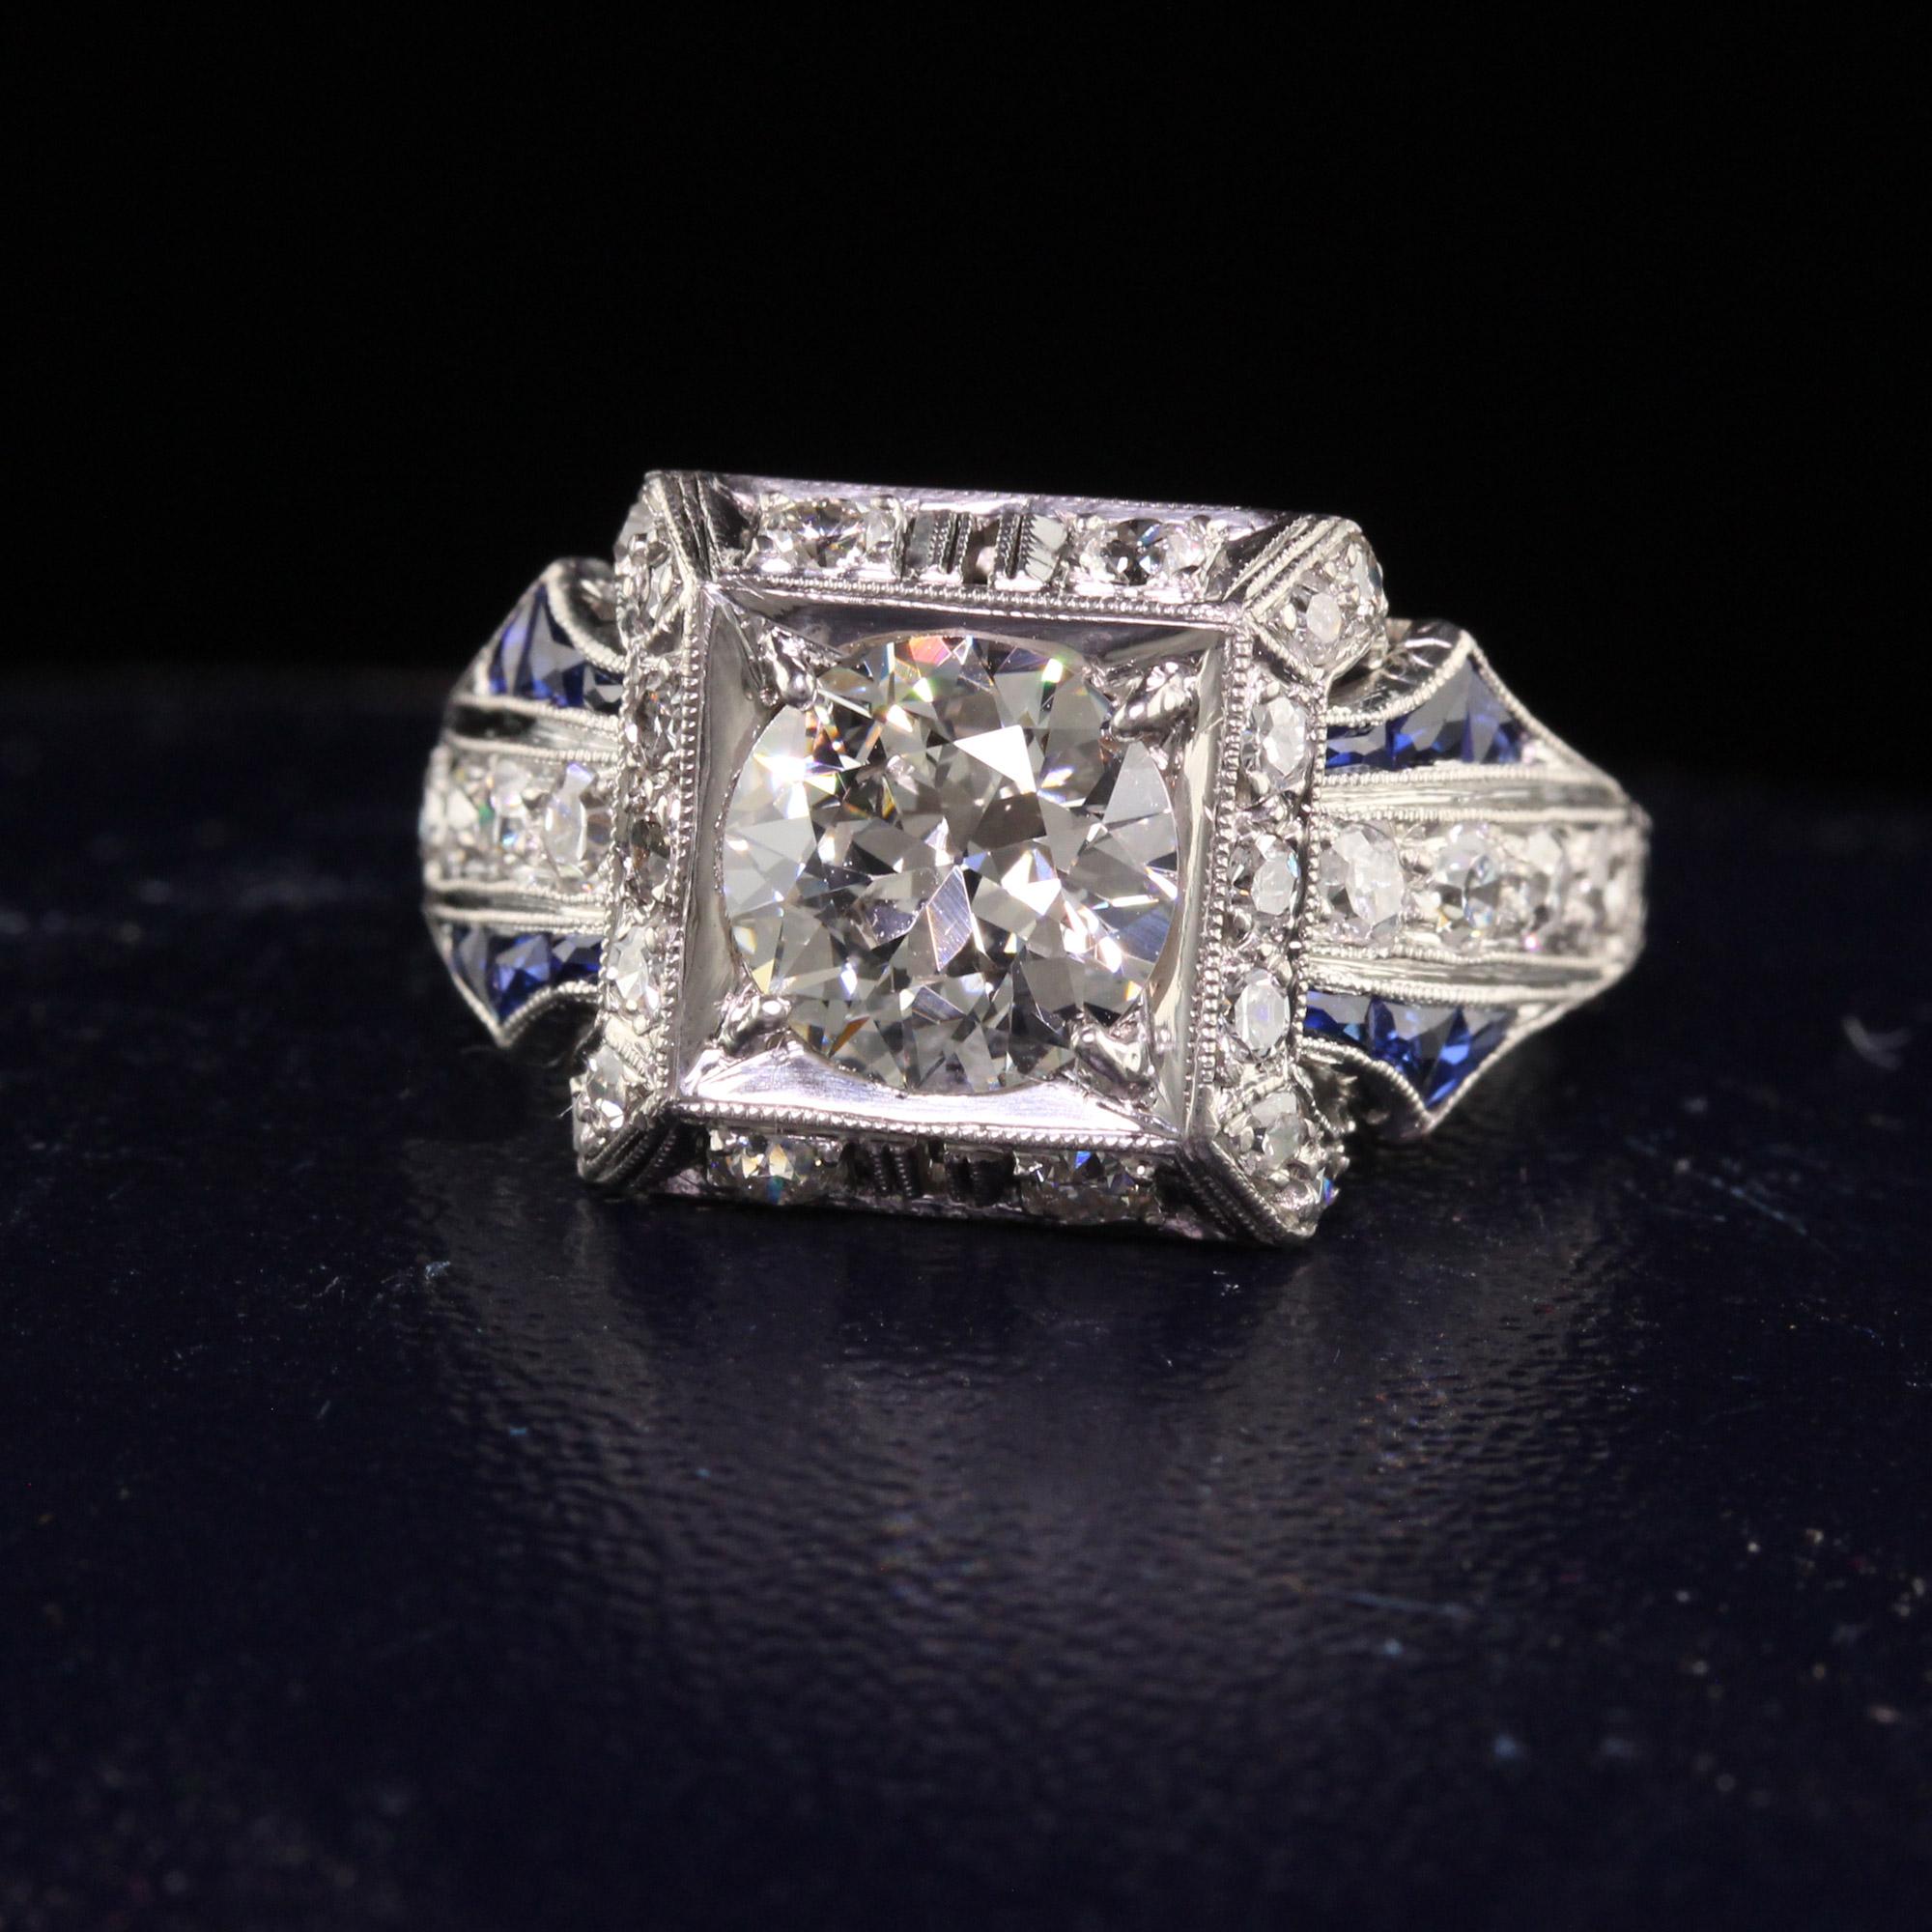 Beautiful Antique Art Deco Platinum Old European Diamond Sapphire Engagement Ring - GIA. This incredible engagement ring is crafted in platinum. The center holds a gorgeous old european cut diamond that has a GIA report. The mounting is a work of